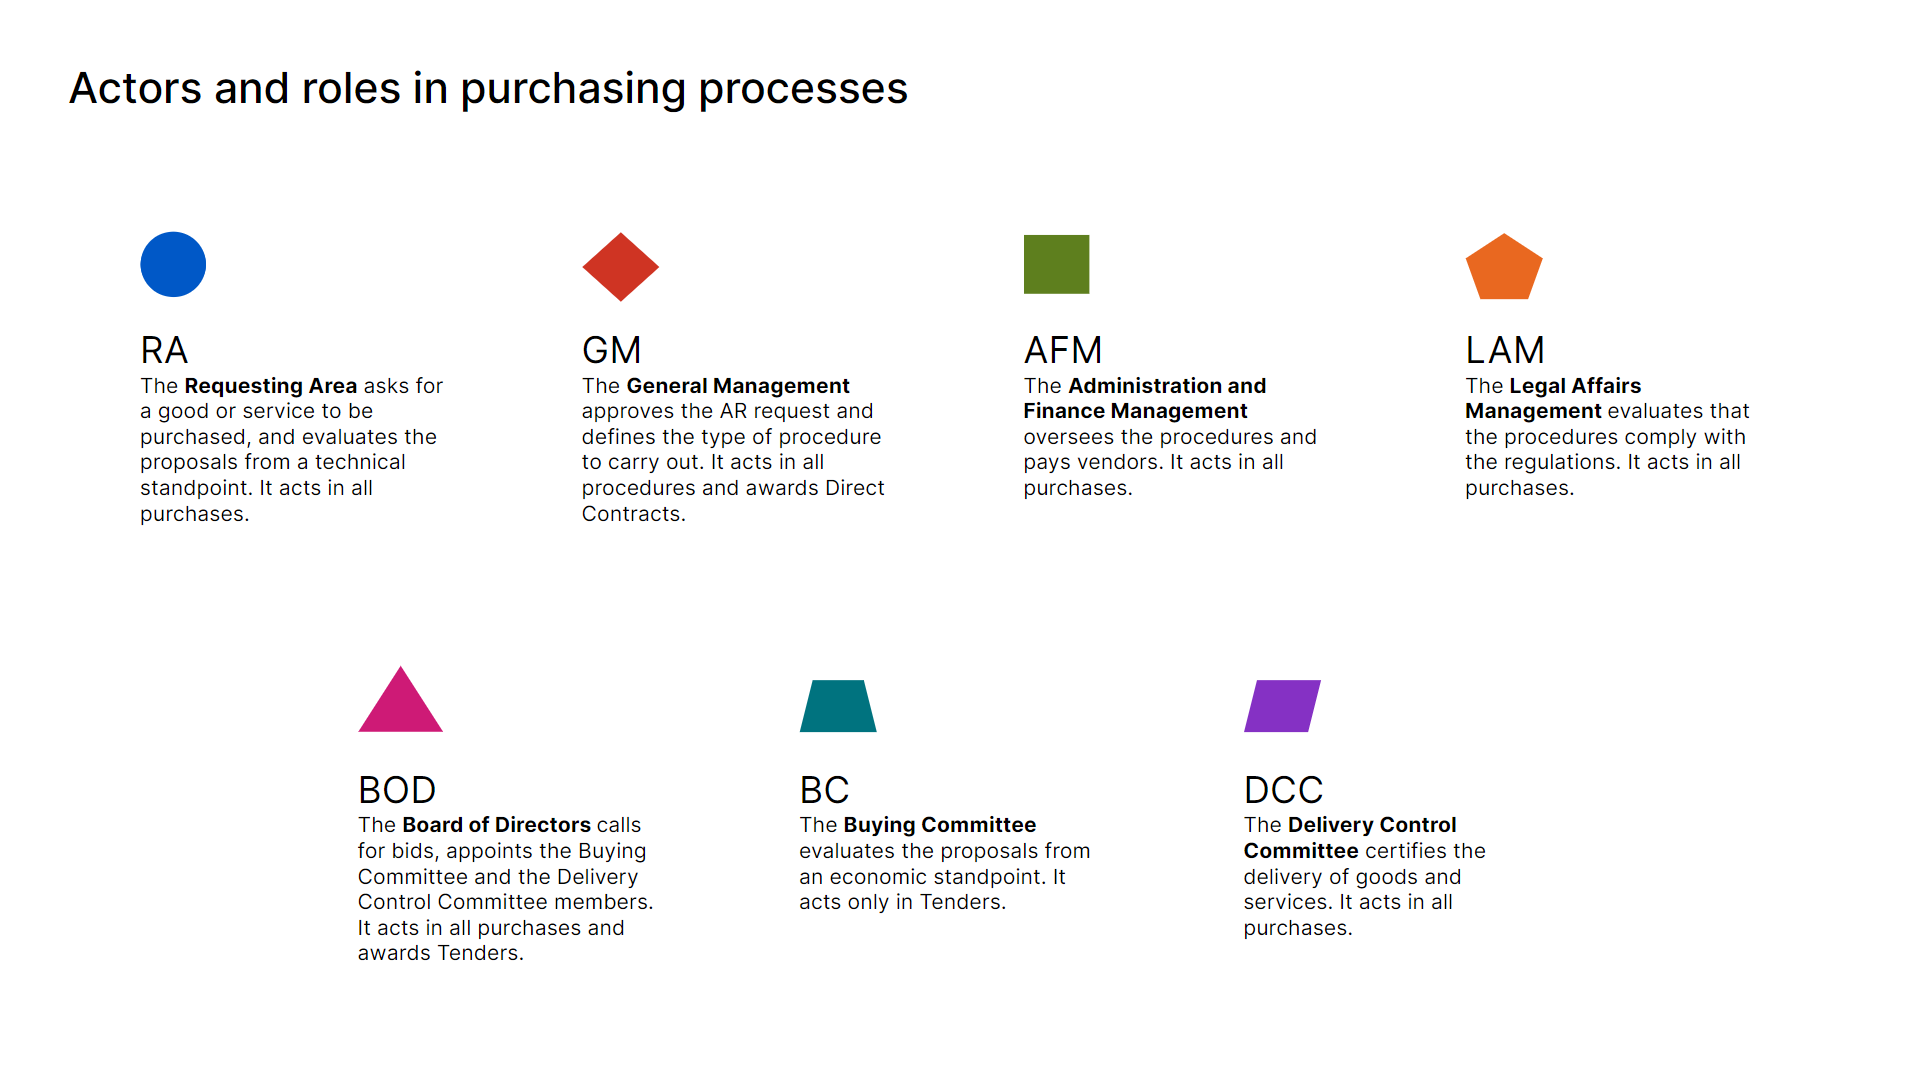 Poster describing the actors involved in the purchasing process and their roles